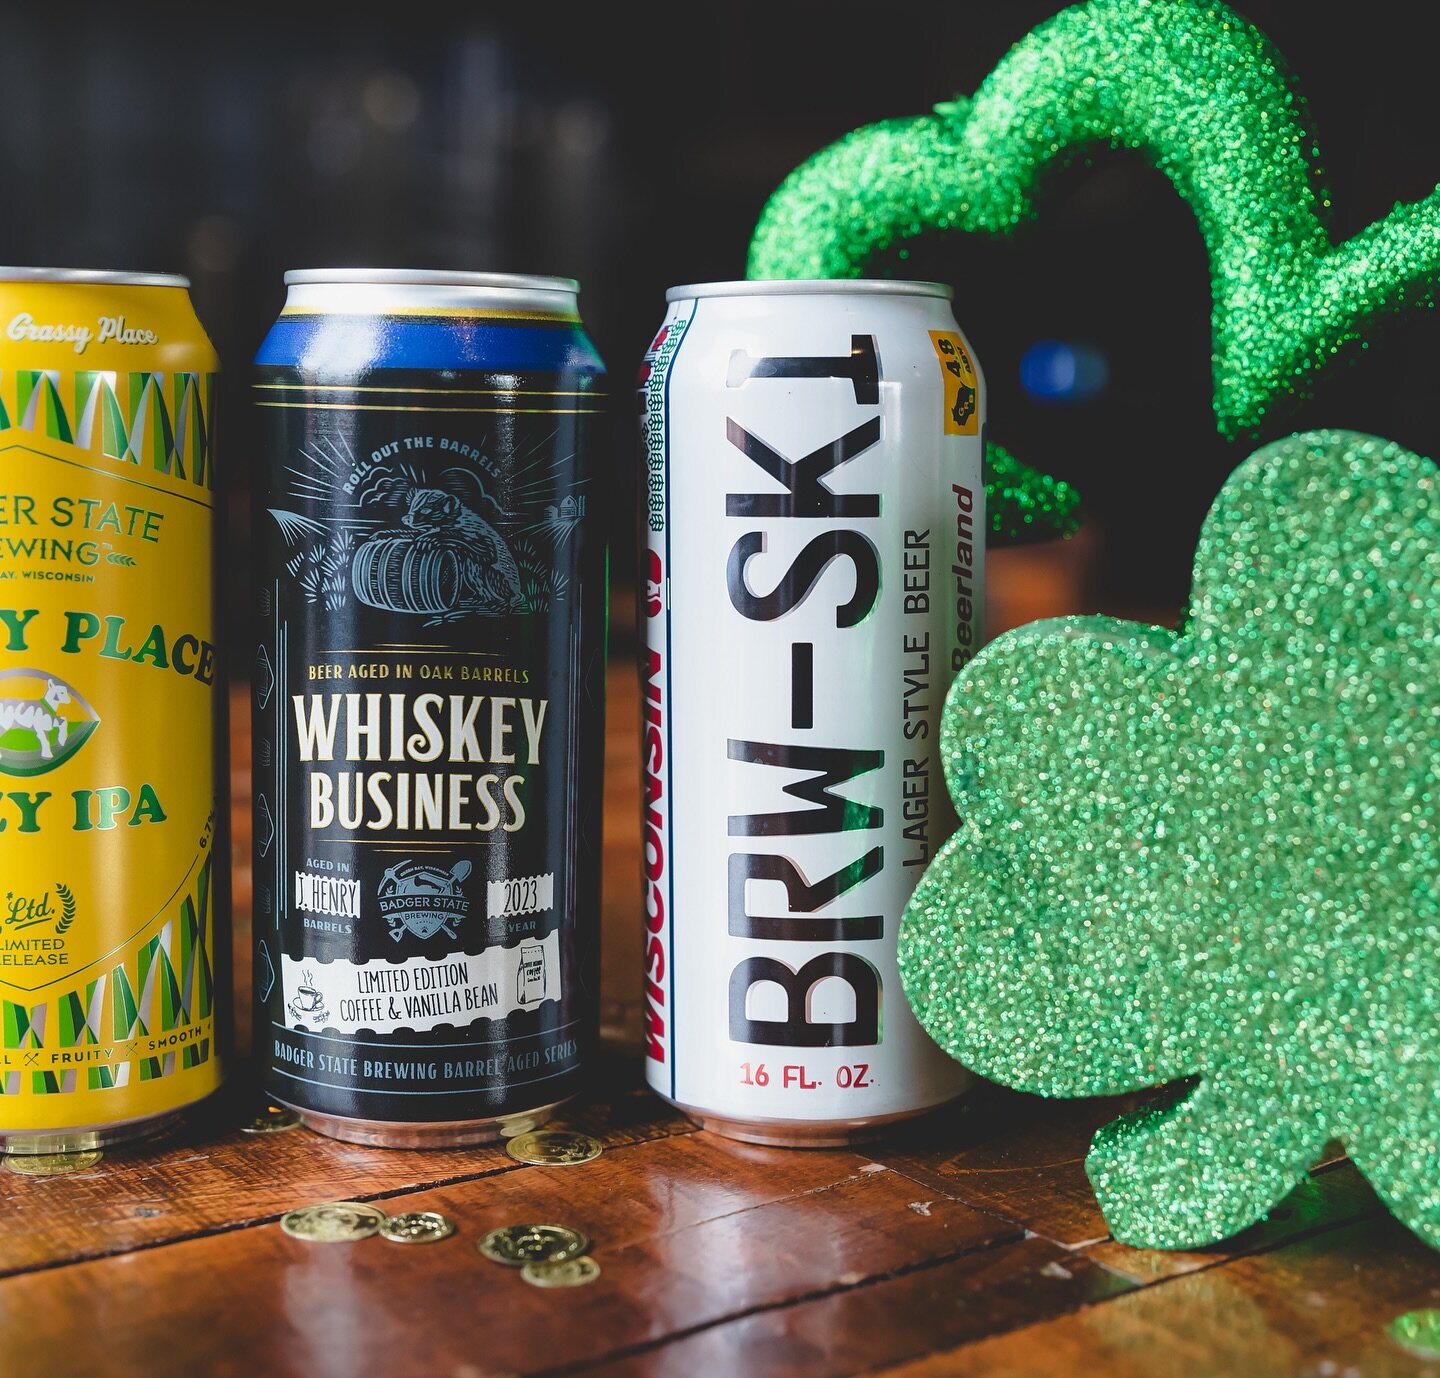 We are going to be rolling out the green carpet for a brewery-style St. Paddy&rsquo;s weekend celebration starting today 3/15. Barrel Aged Stout releases, pint specials of our Shamrock Shake stout and special guest taps, and some light hearted fun. M